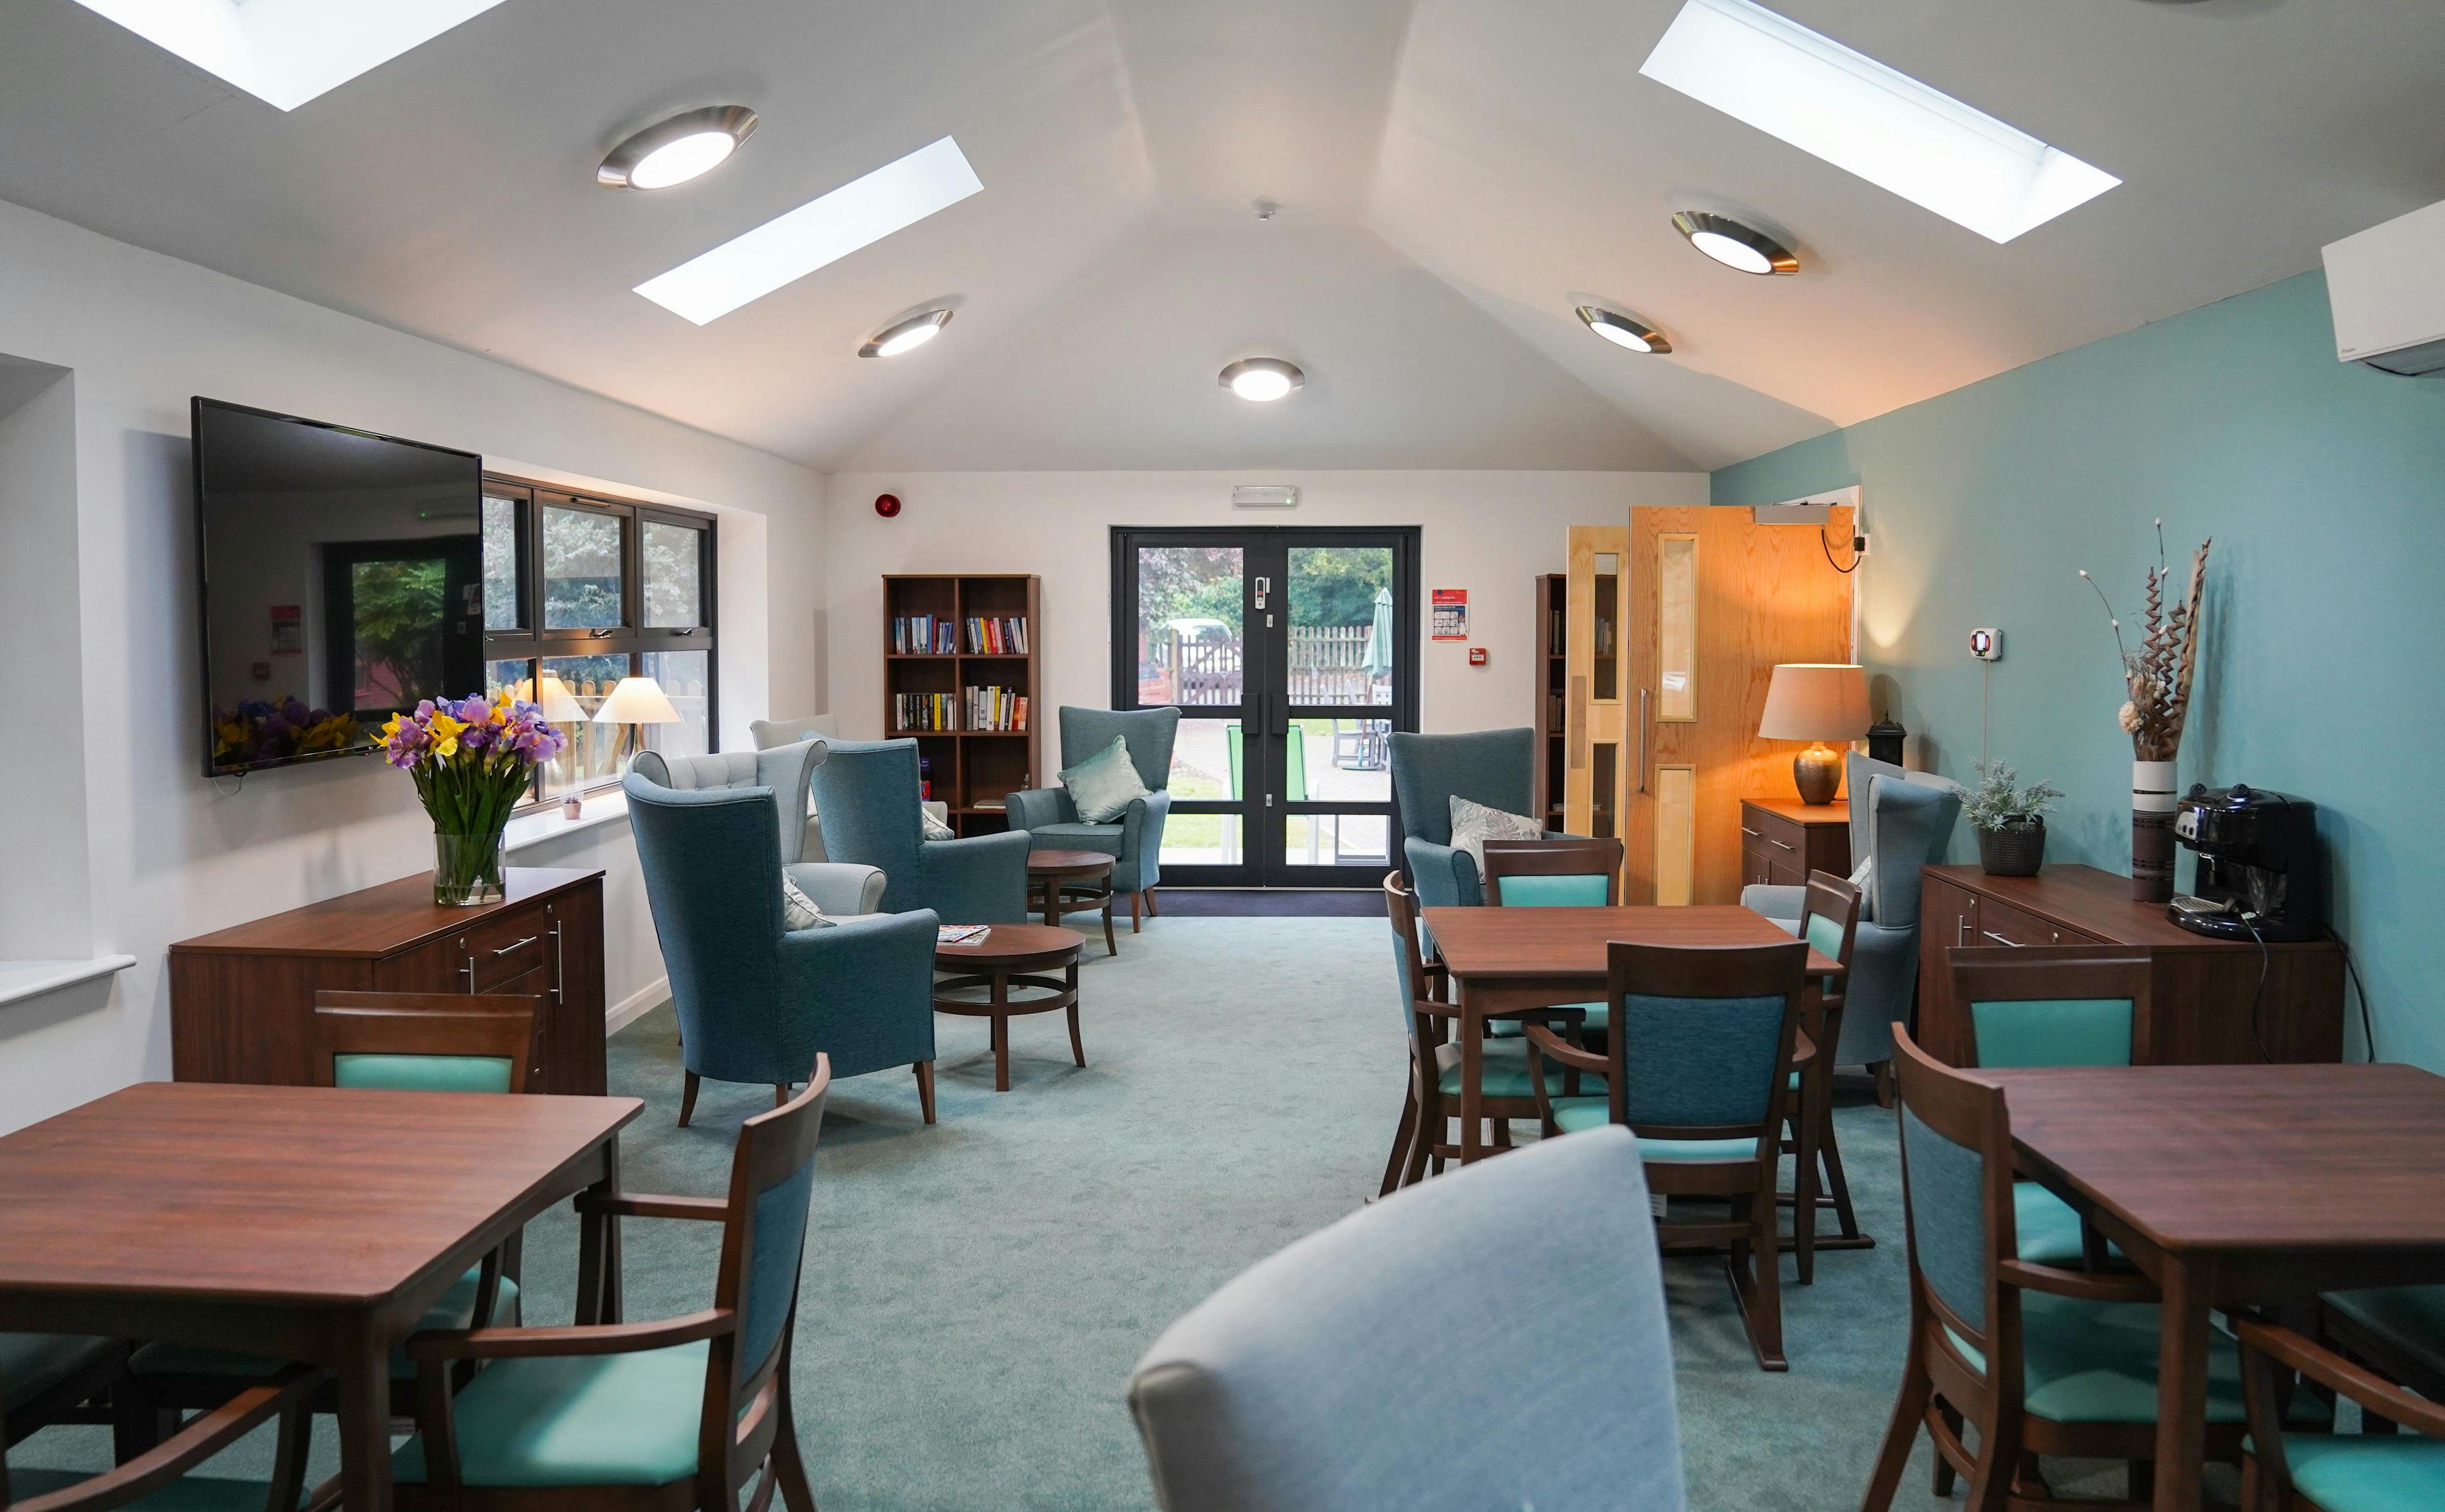 Lounge of Hastings care home in Malvern, West Midlands